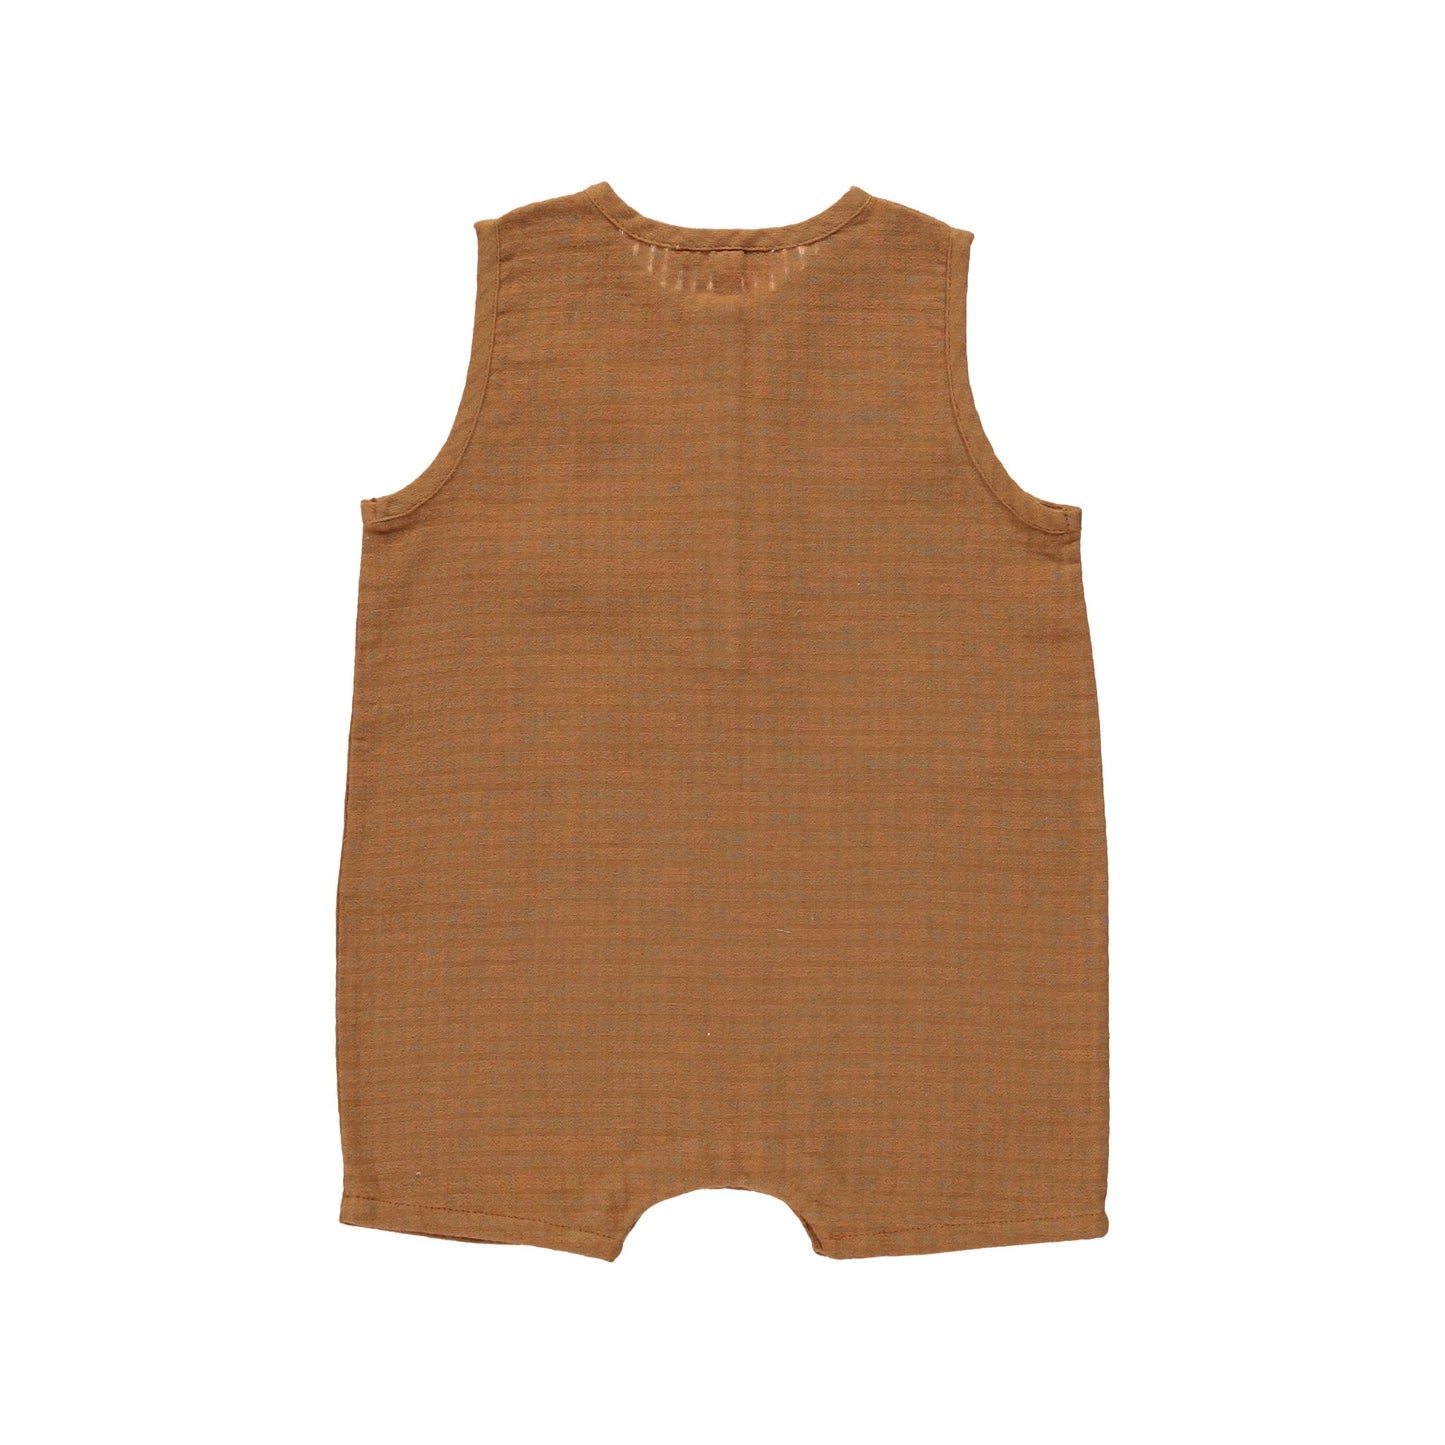 Thorn overalls Baby Grows Bebe Organic 